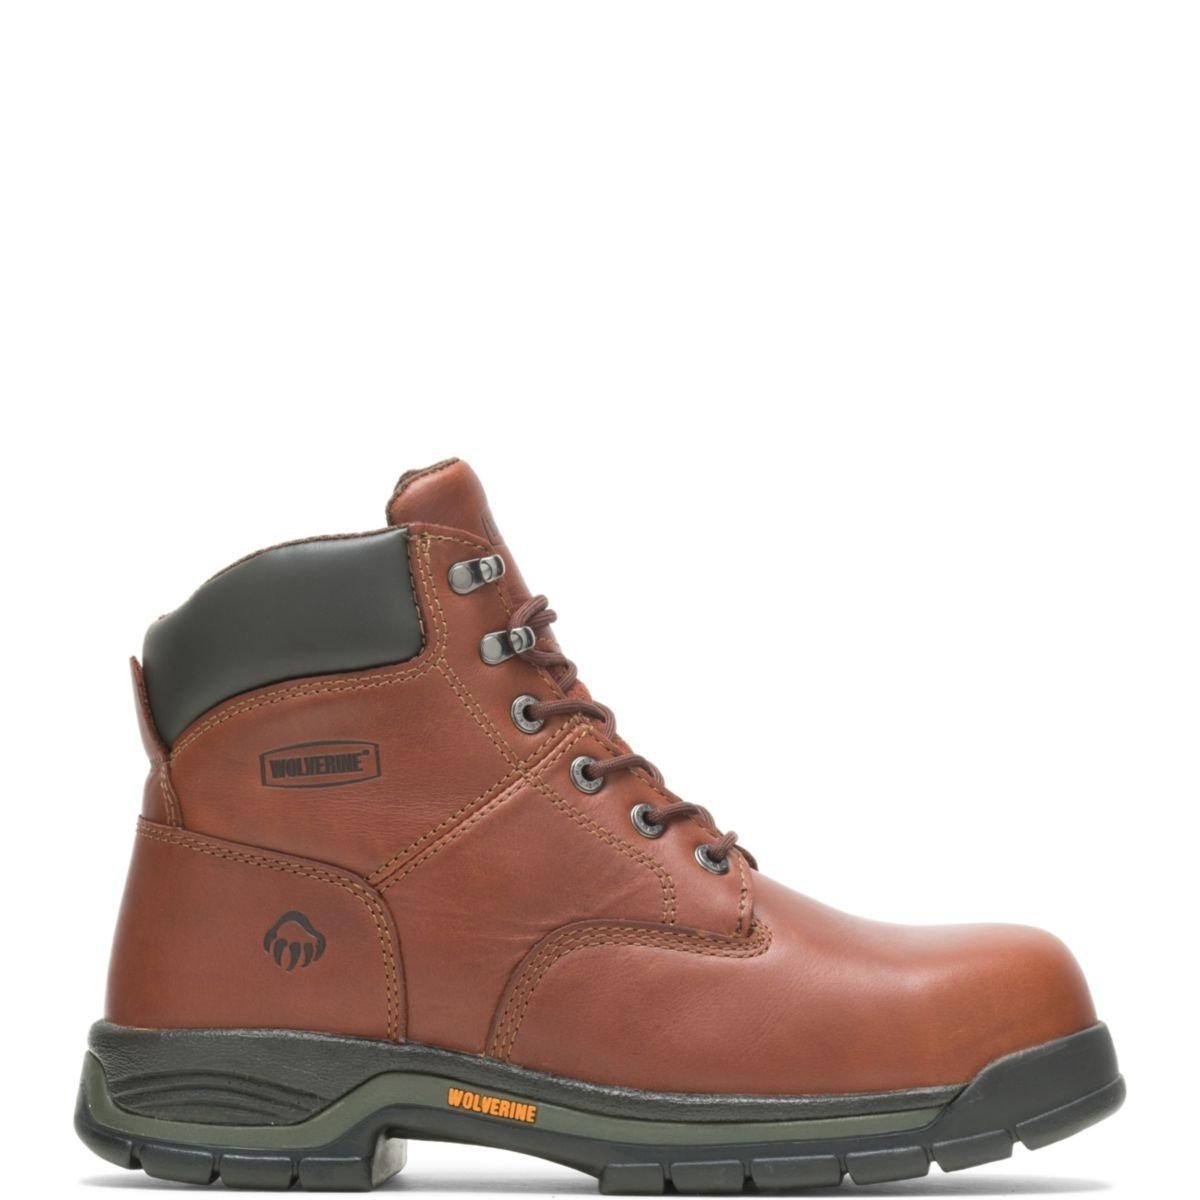 WOLVERINE Men's Harrison 6 Lace-Up SoftToe Work Boot Brown - W04906 Varies BROWN - BROWN, 9.5 X-Wide